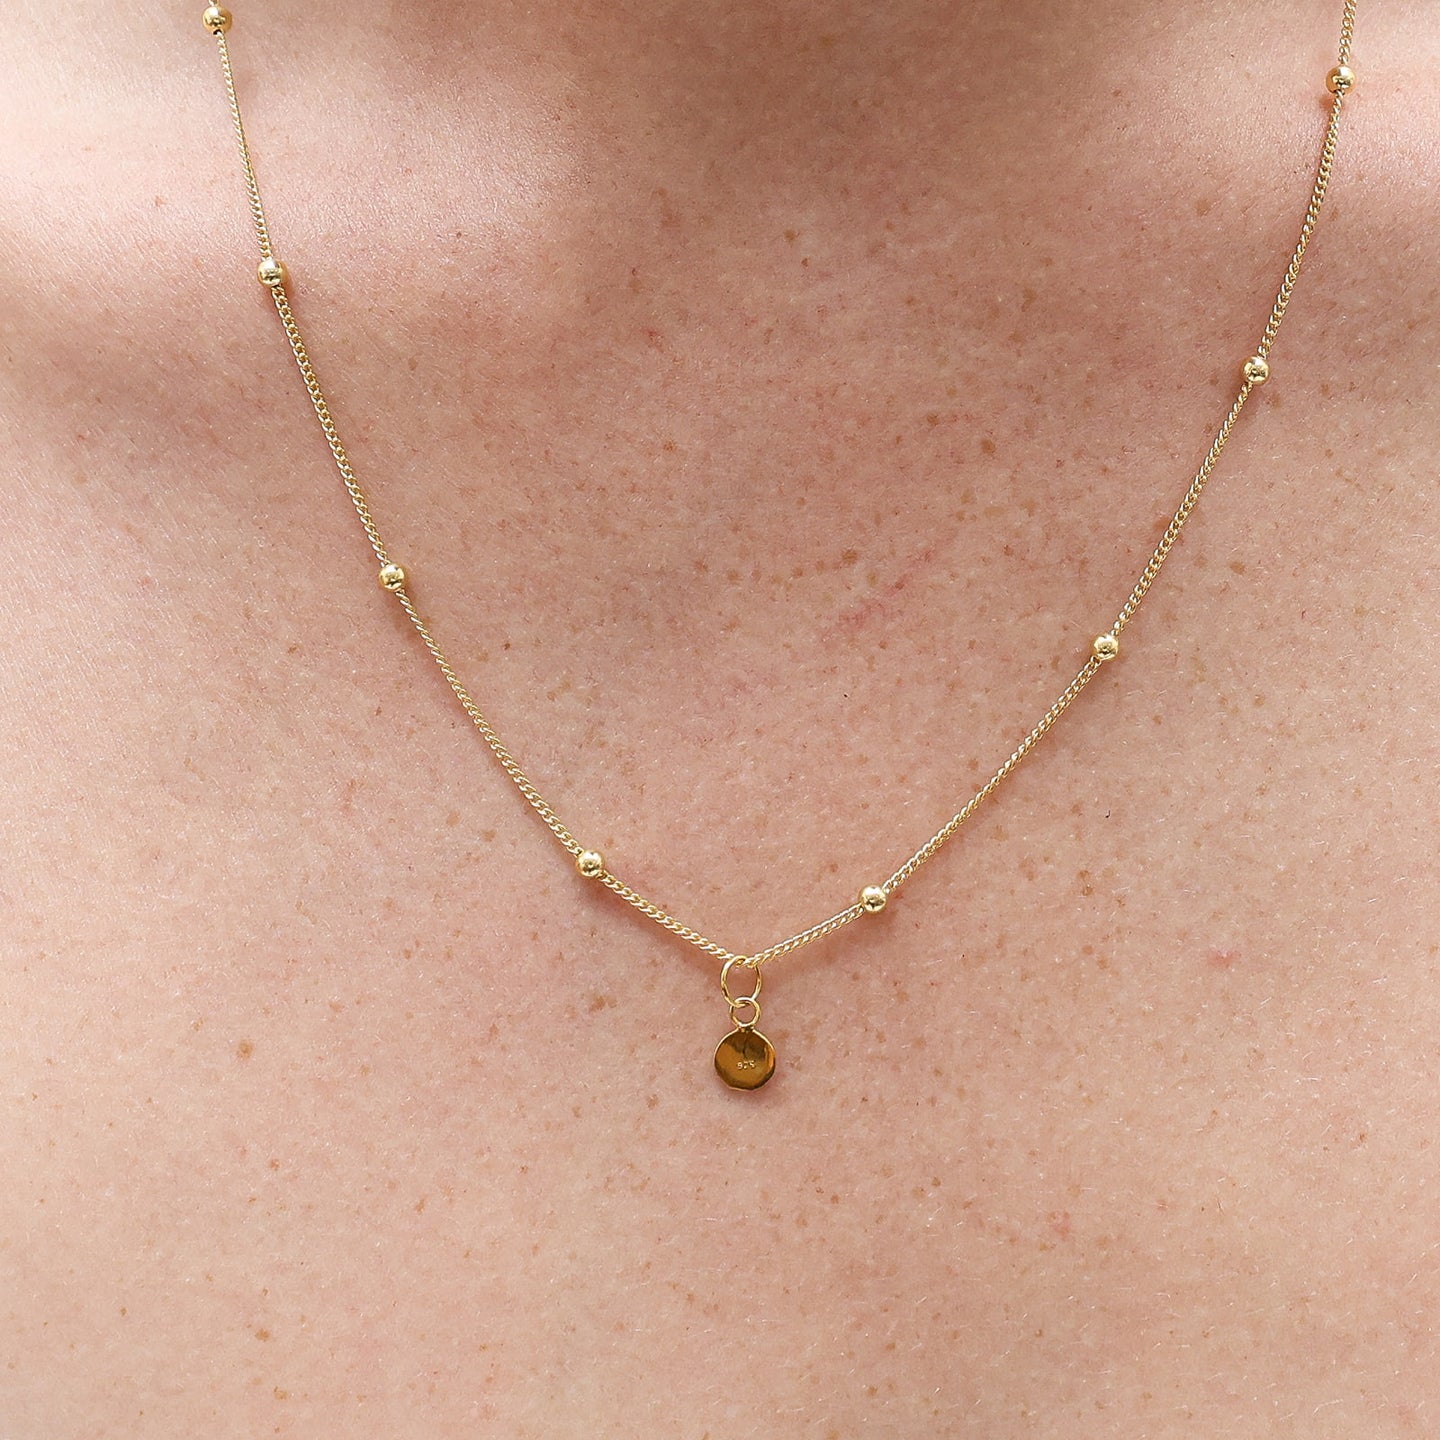 Pendant & Gold Ball Chain Necklace